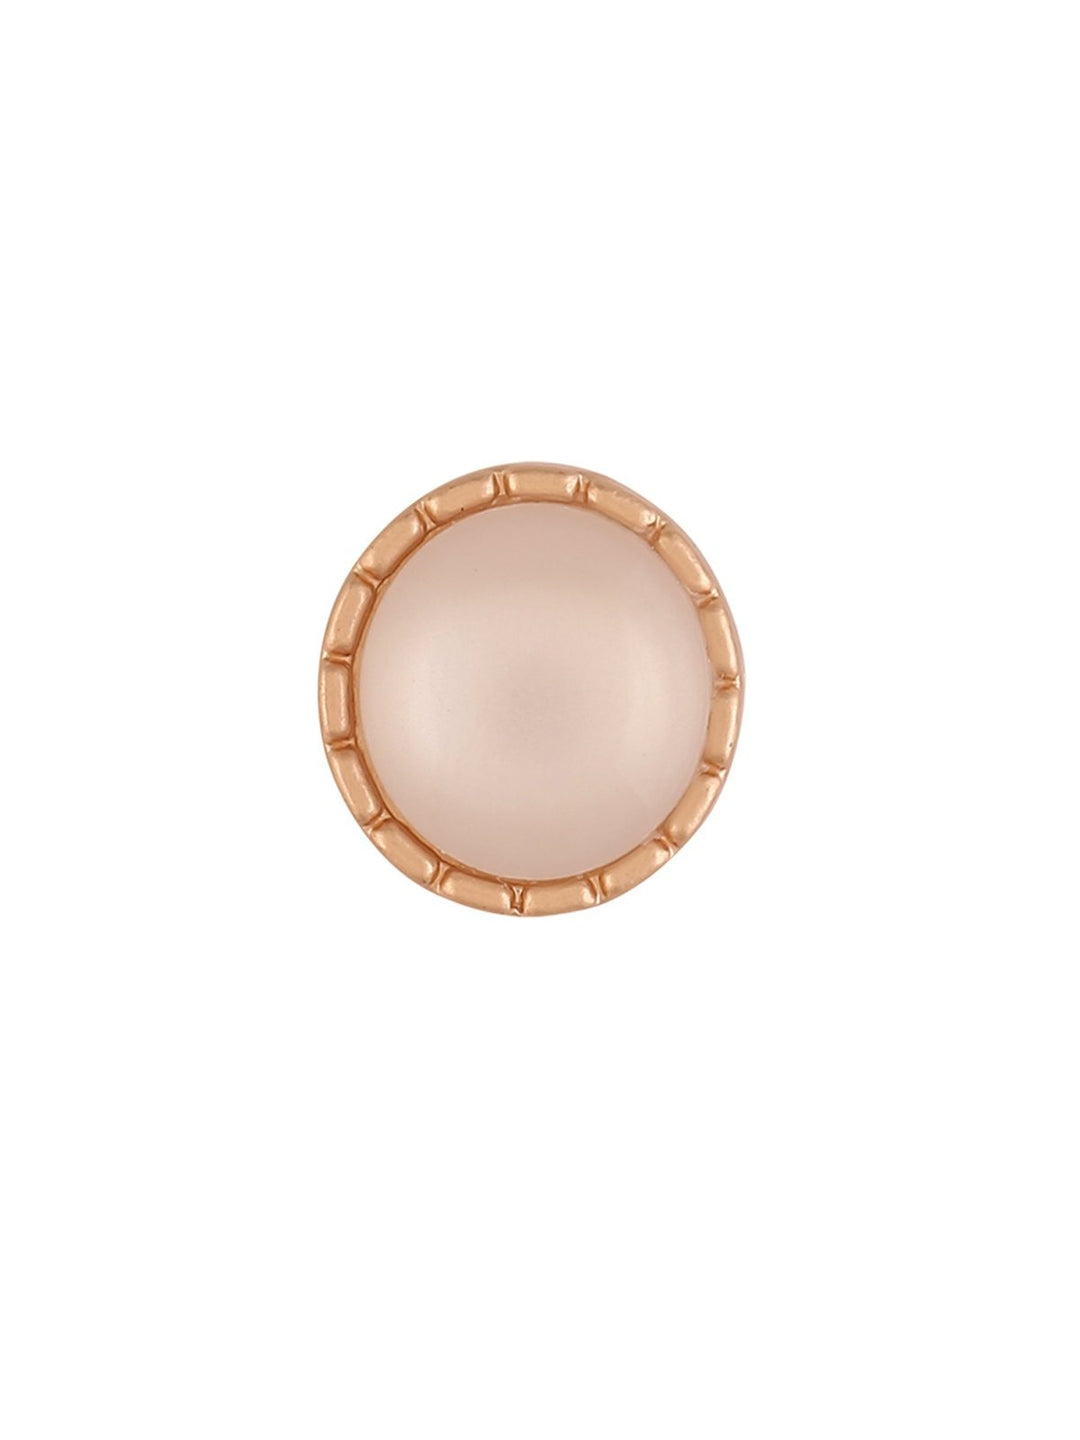 Matte Gold Round Shape with Scalloped Edges Resin Pearl Button